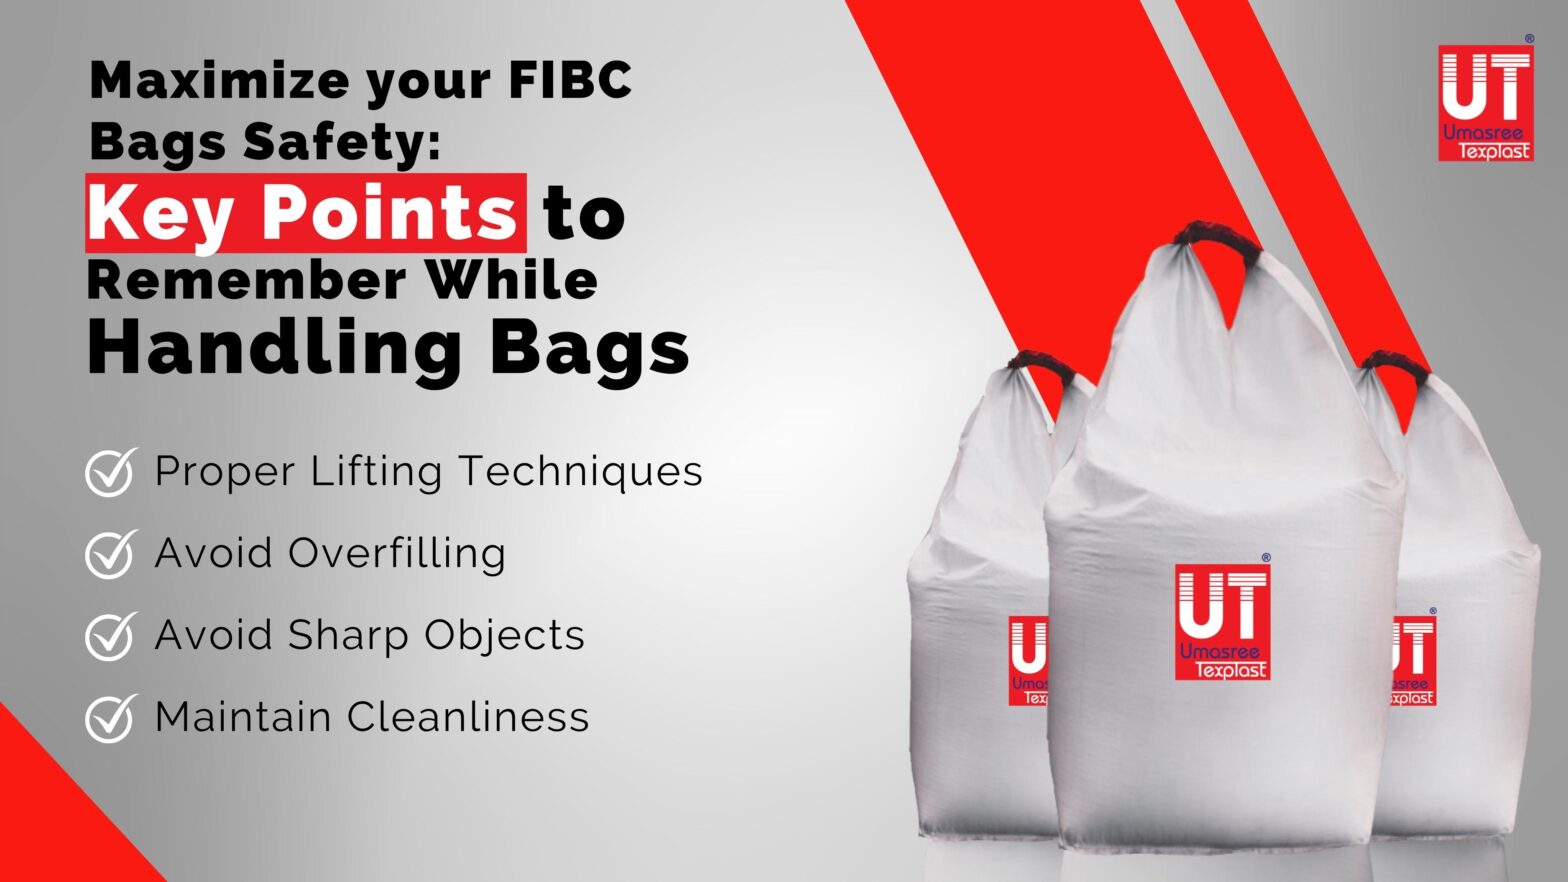 Maximize your FIBC Bags Safety: Key Points to Remember While Handling Bags